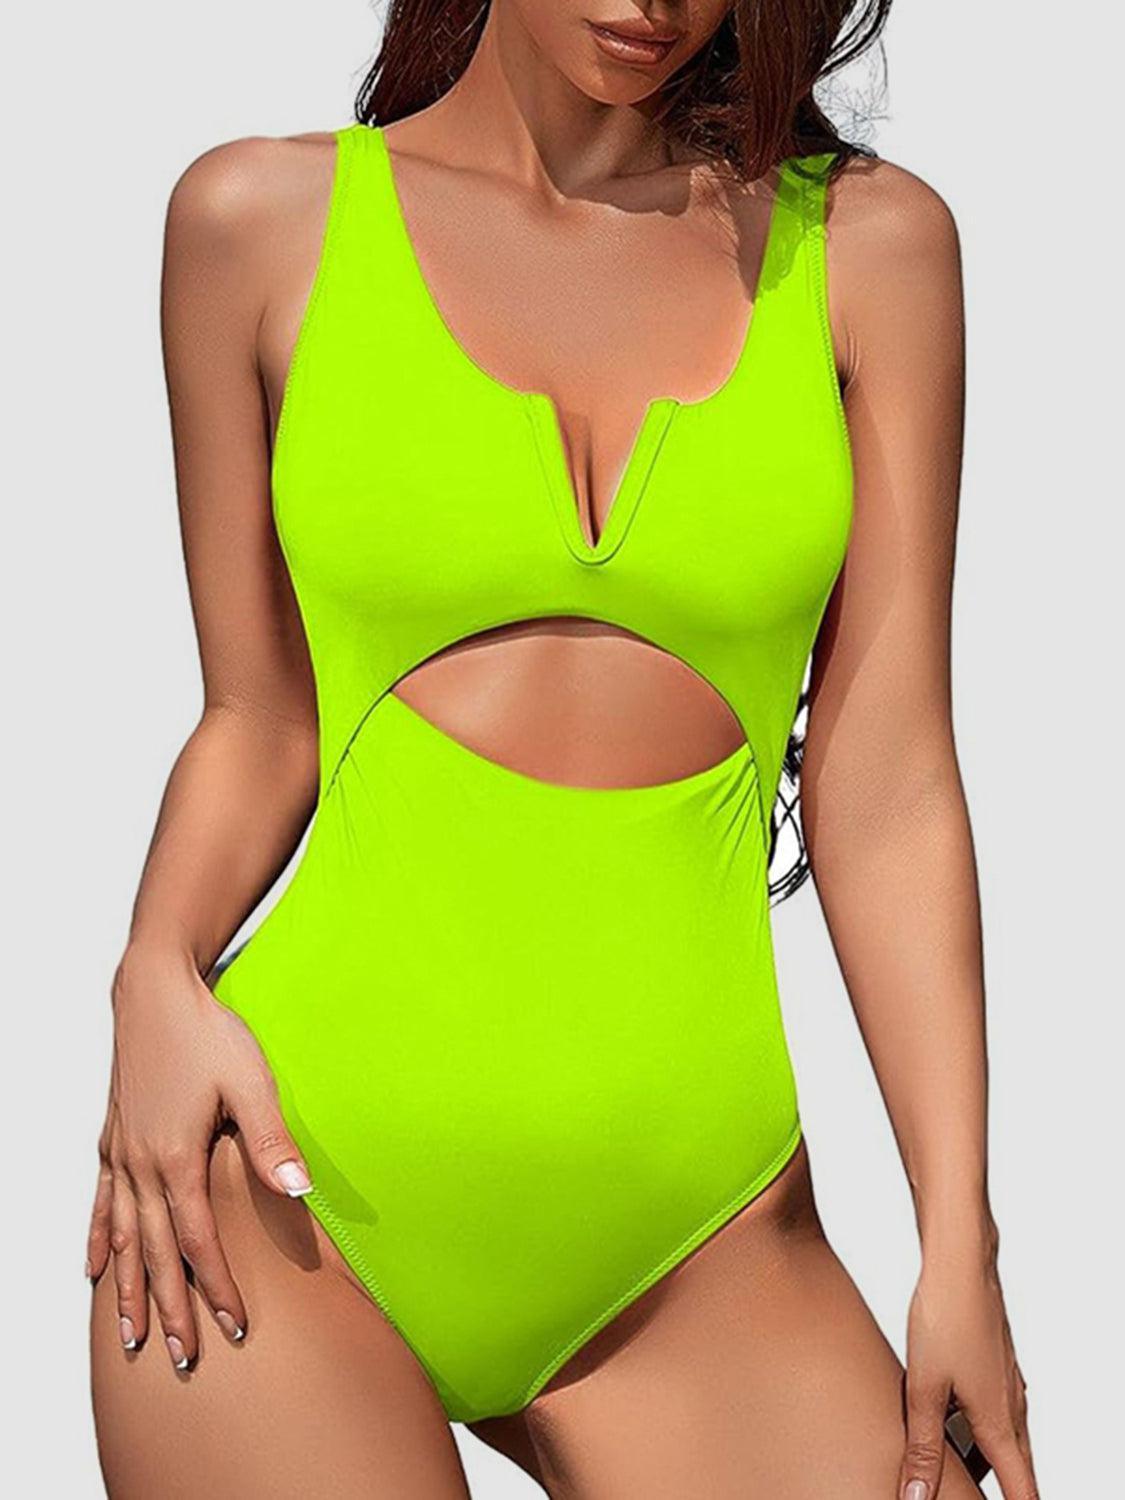 a woman in a neon green swimsuit